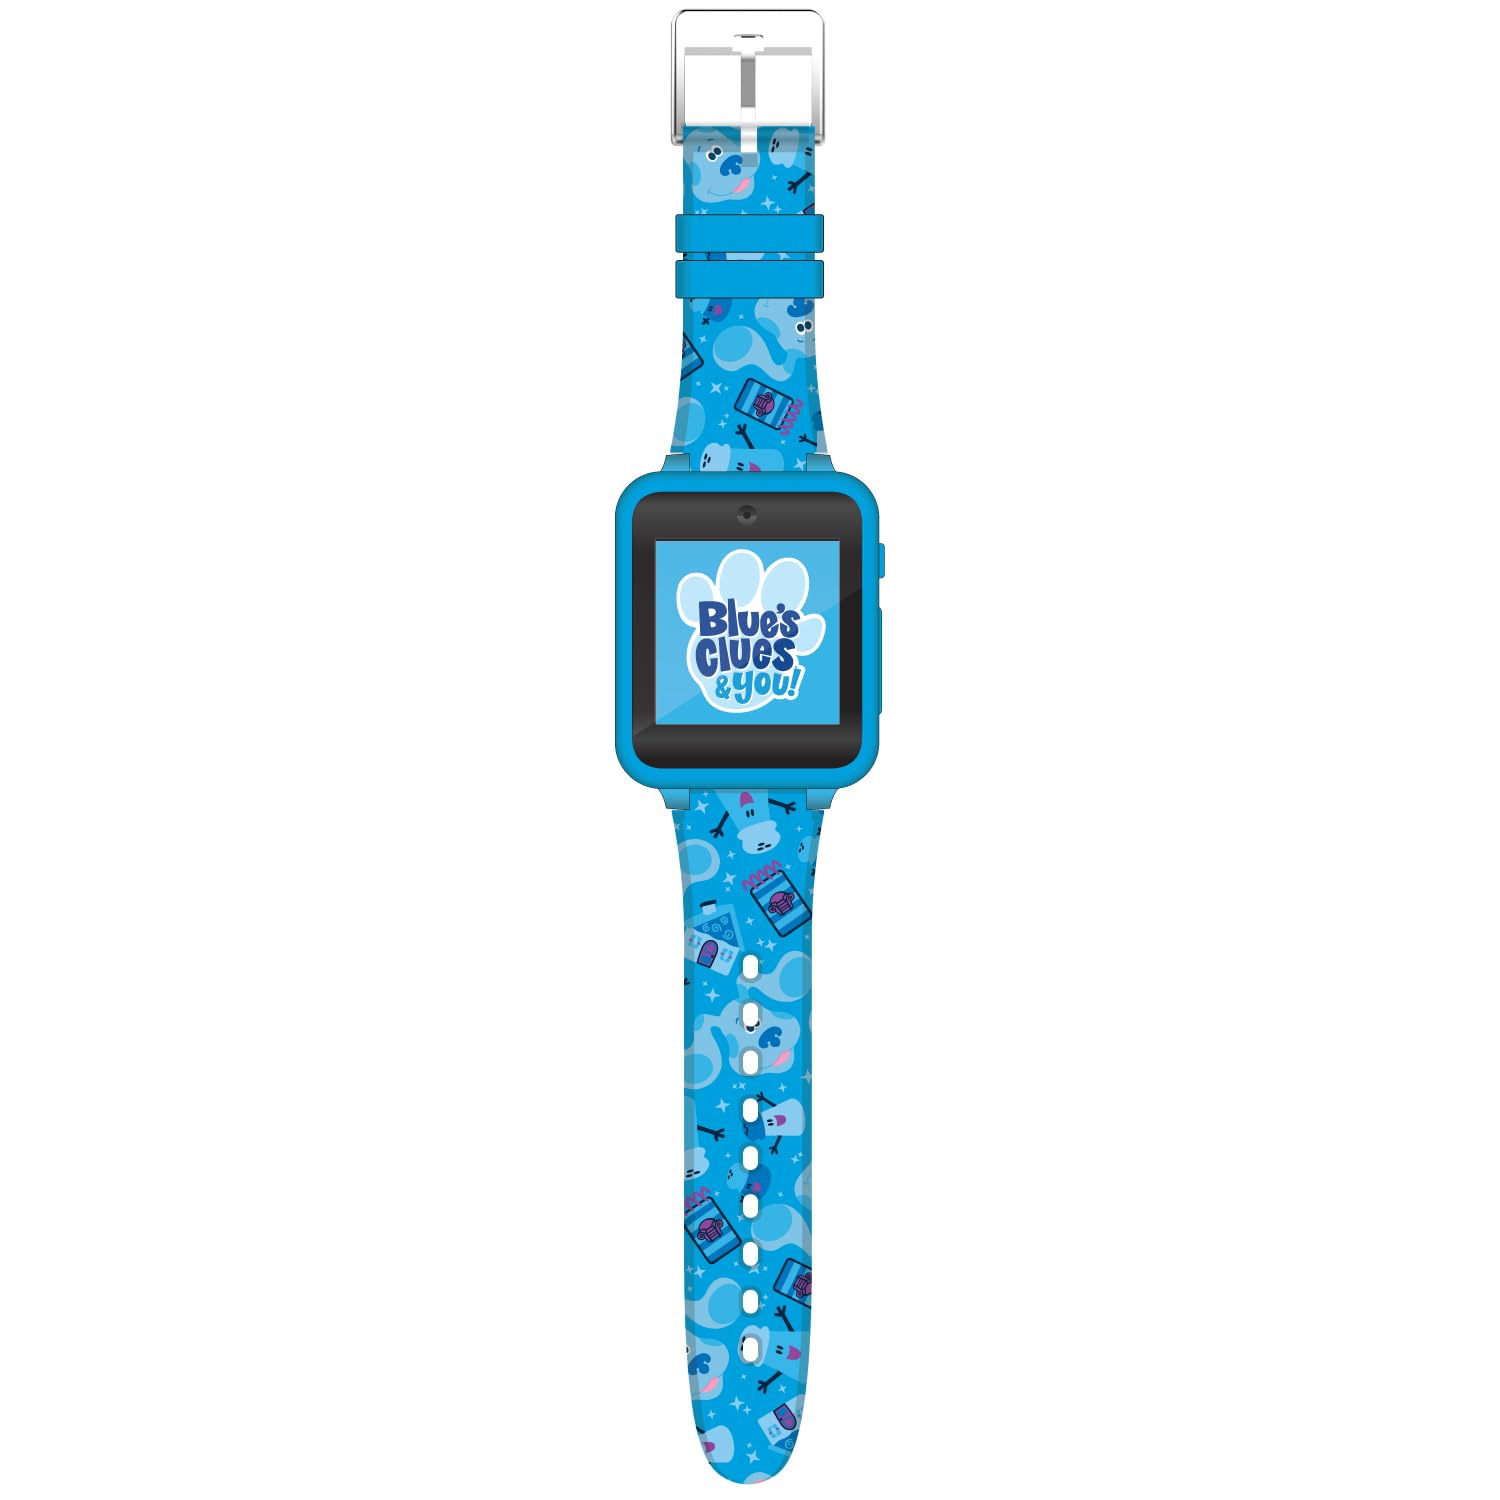 Accutime Blues Clues Kids Blue Educational Learning Touchscreen Smart Watch Toy for Boys, Girls, Toddlers - Selfie Cam, Learning Games, Alarm, Calculator, Pedometer & More (Model:BLU4016AZ)